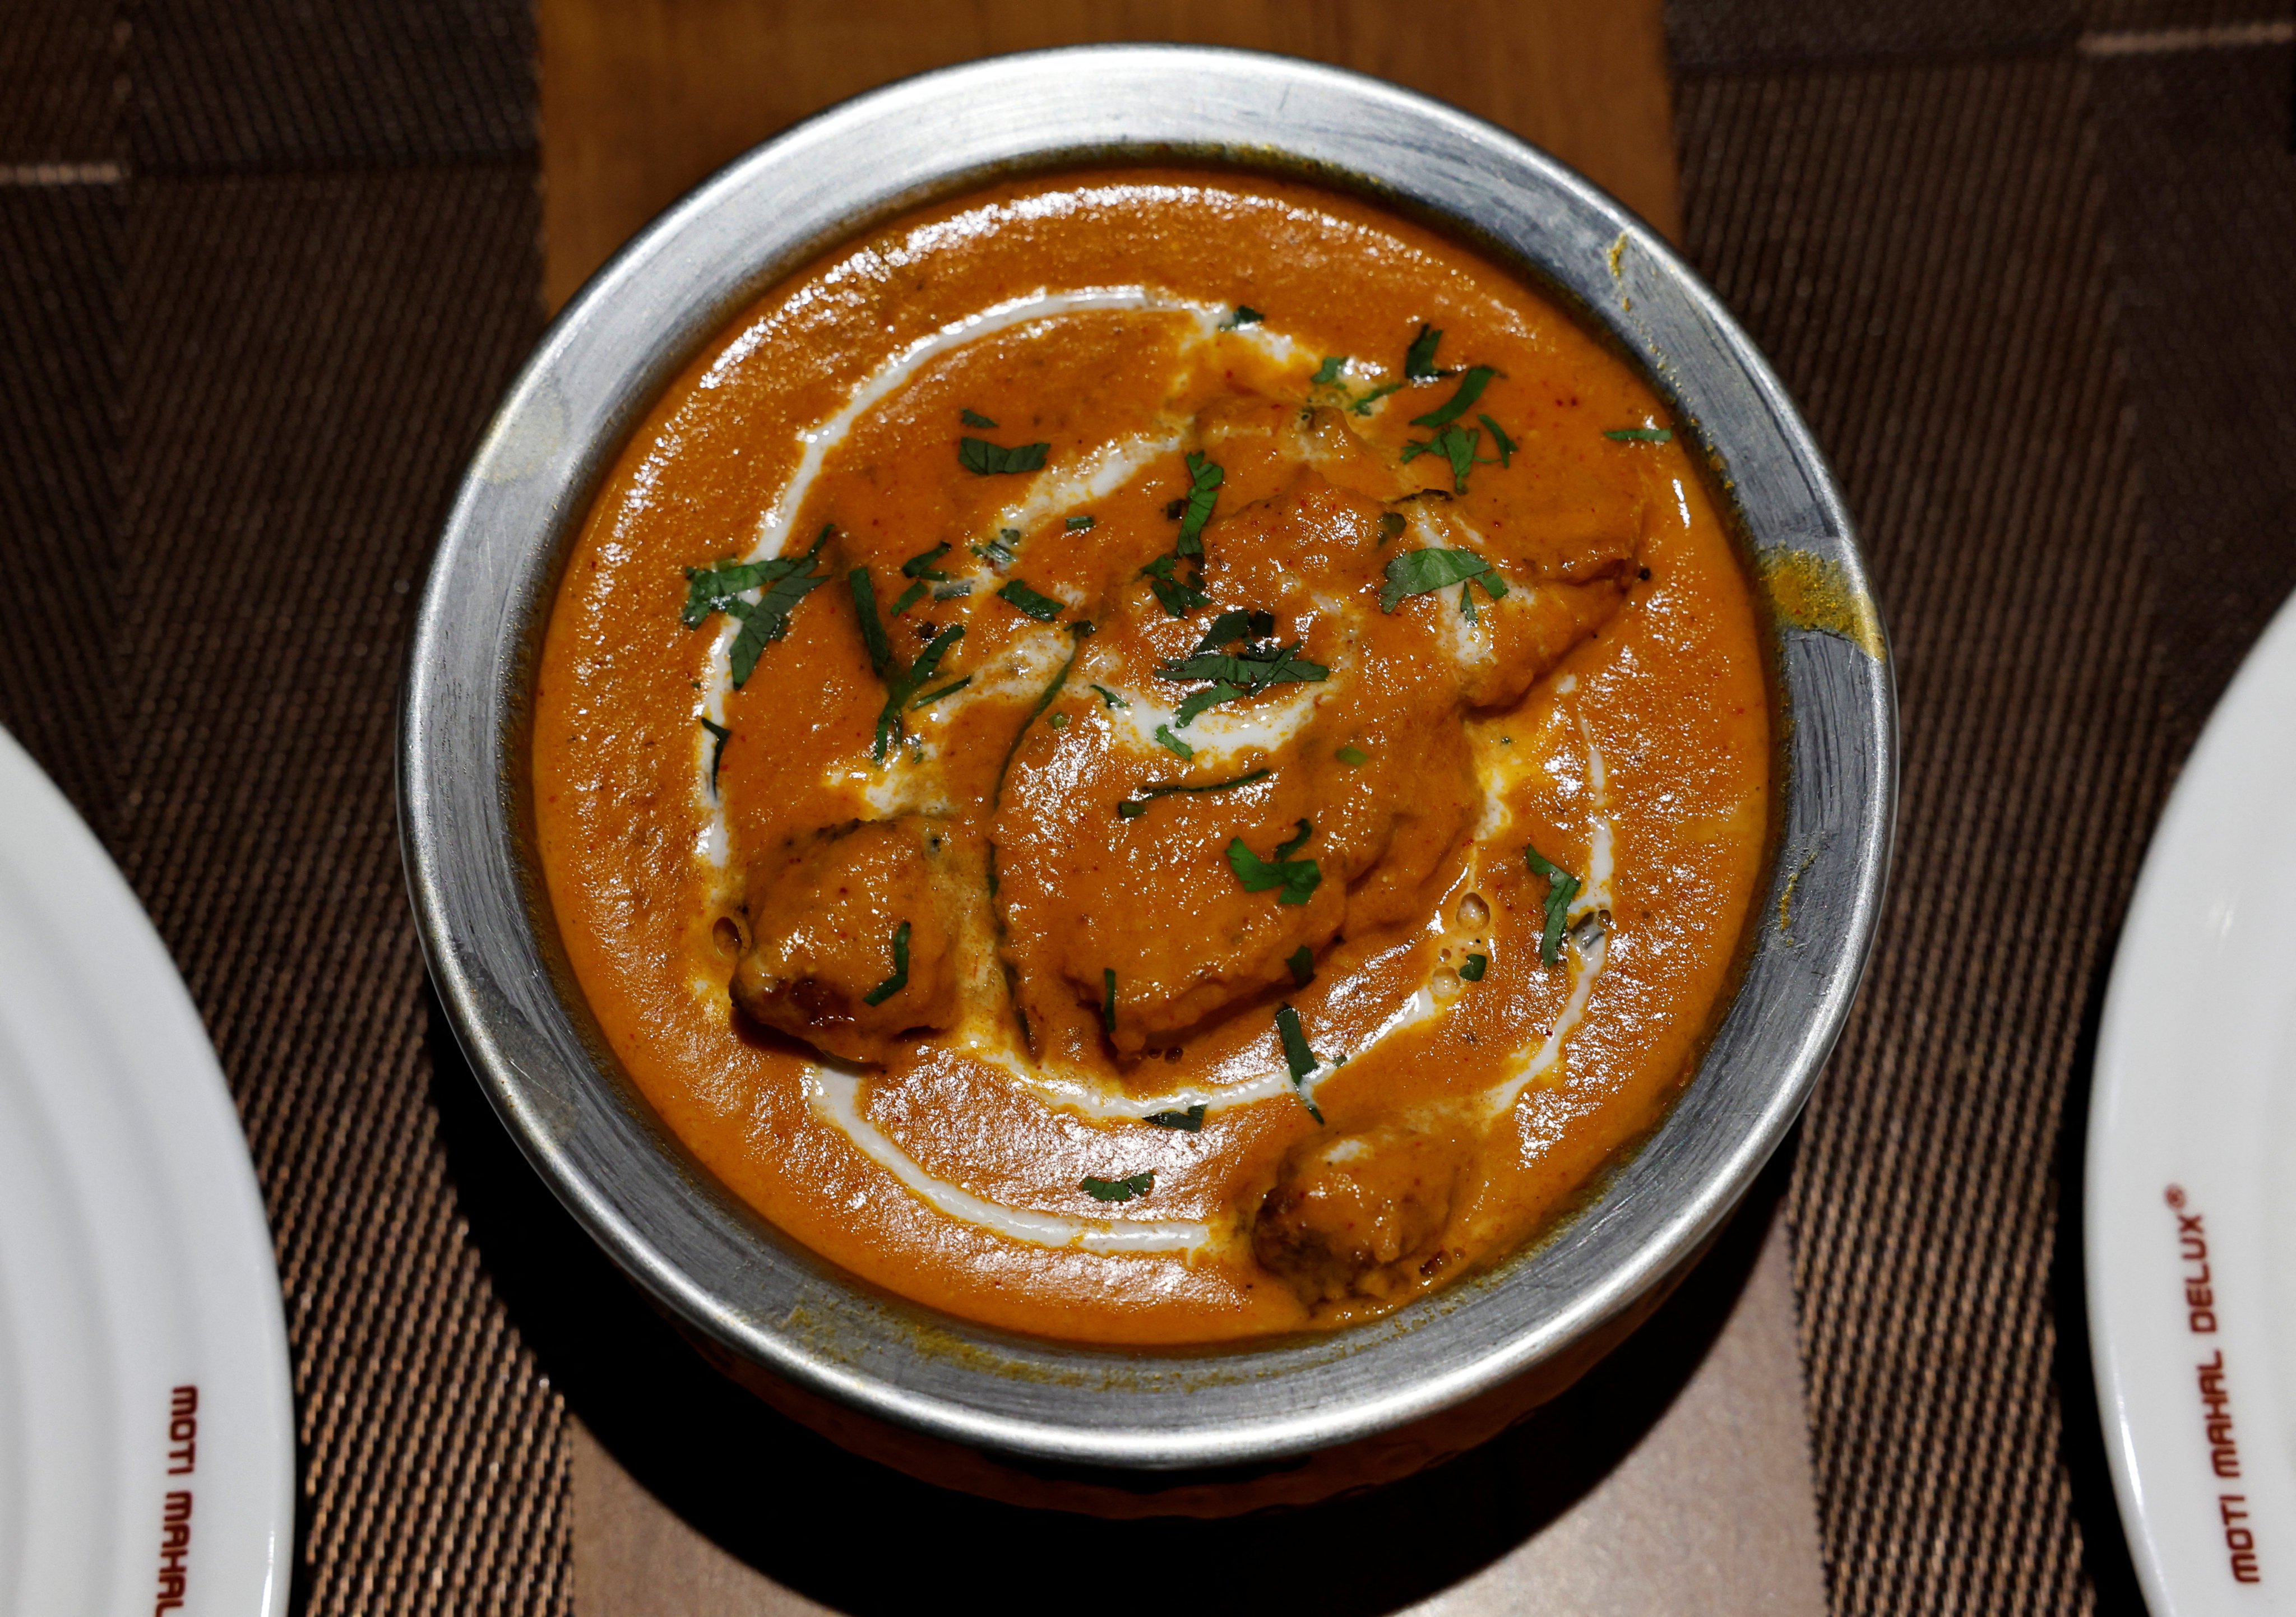 Two Indian restaurant chains are doing battle in court over claims of the origins of butter chicken. Photo: Reuters